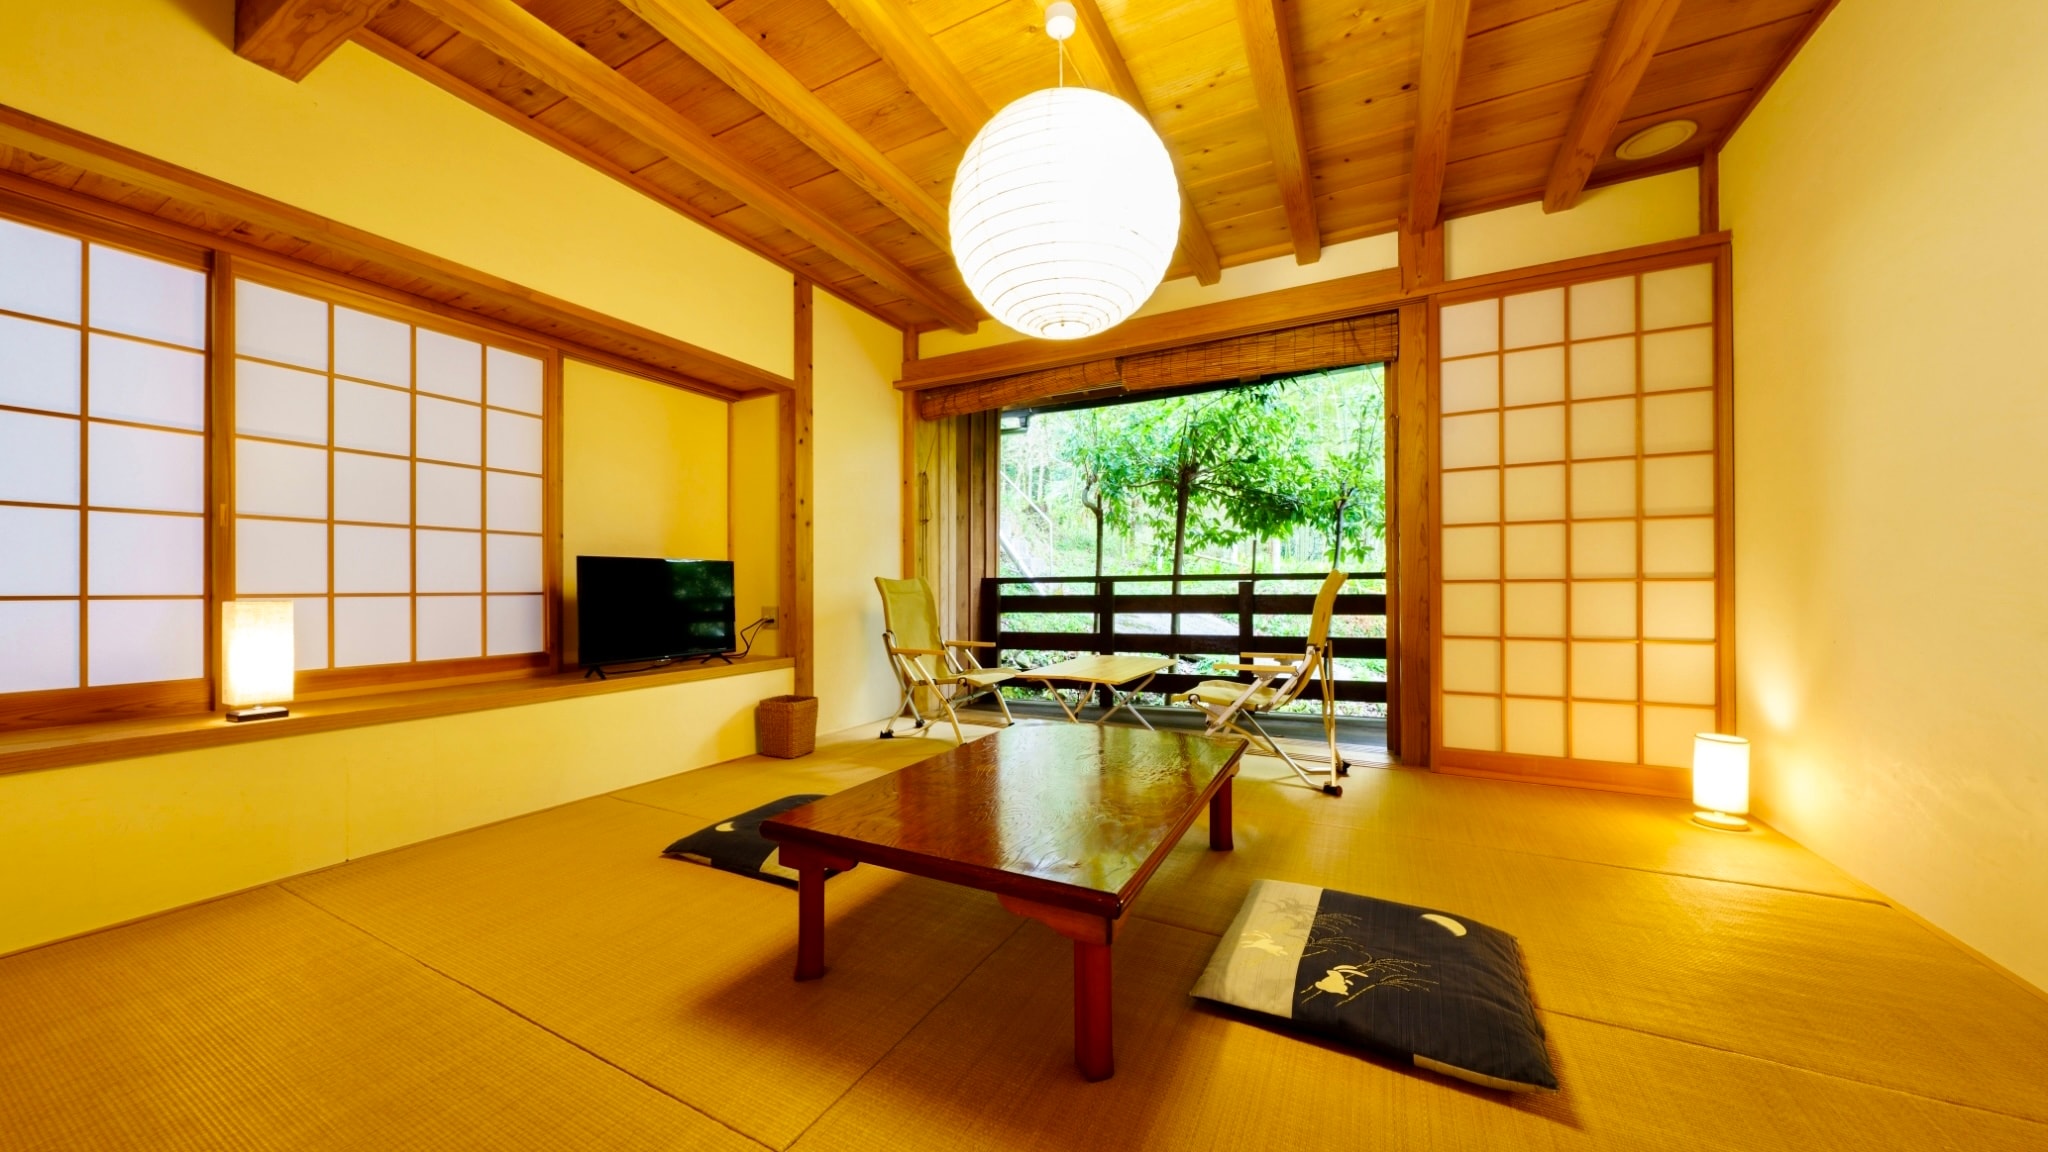 8-tatami Japanese-style room in the lodging building